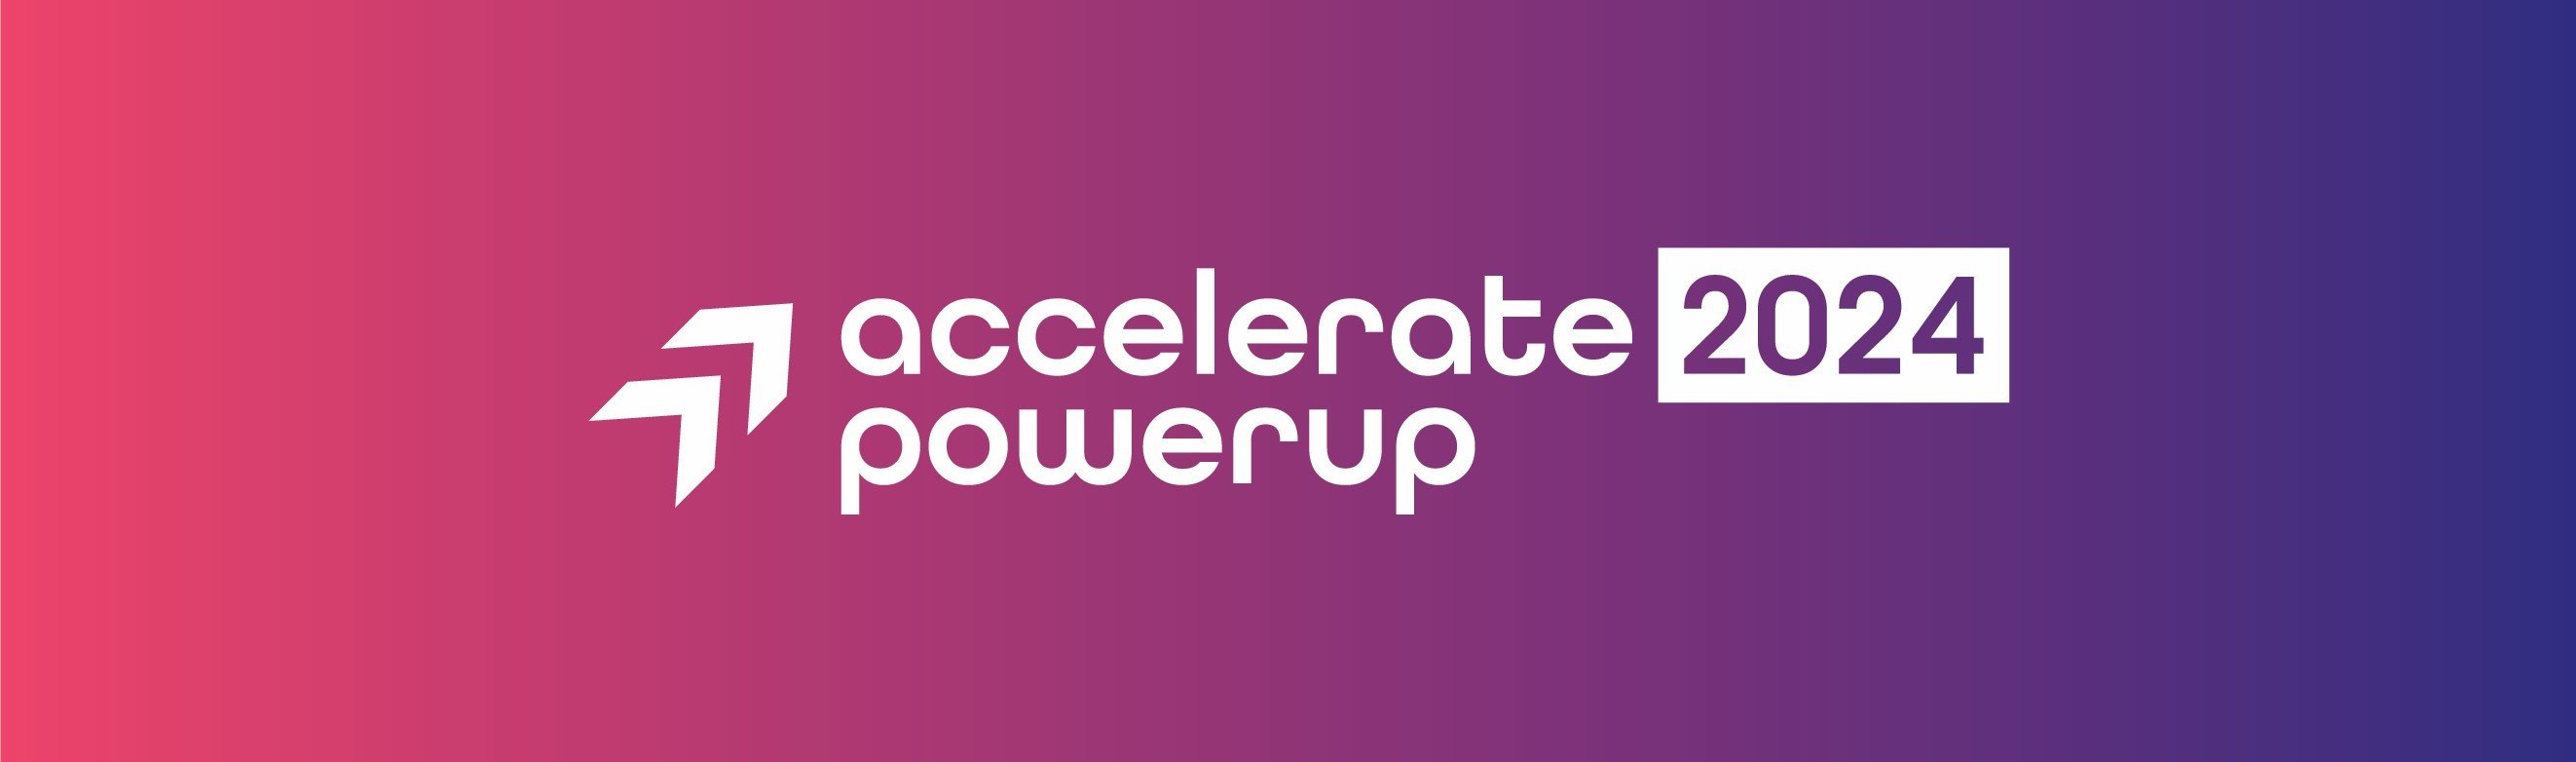 Accelerate 2024 PowerUp Transforming the Employee Relationship